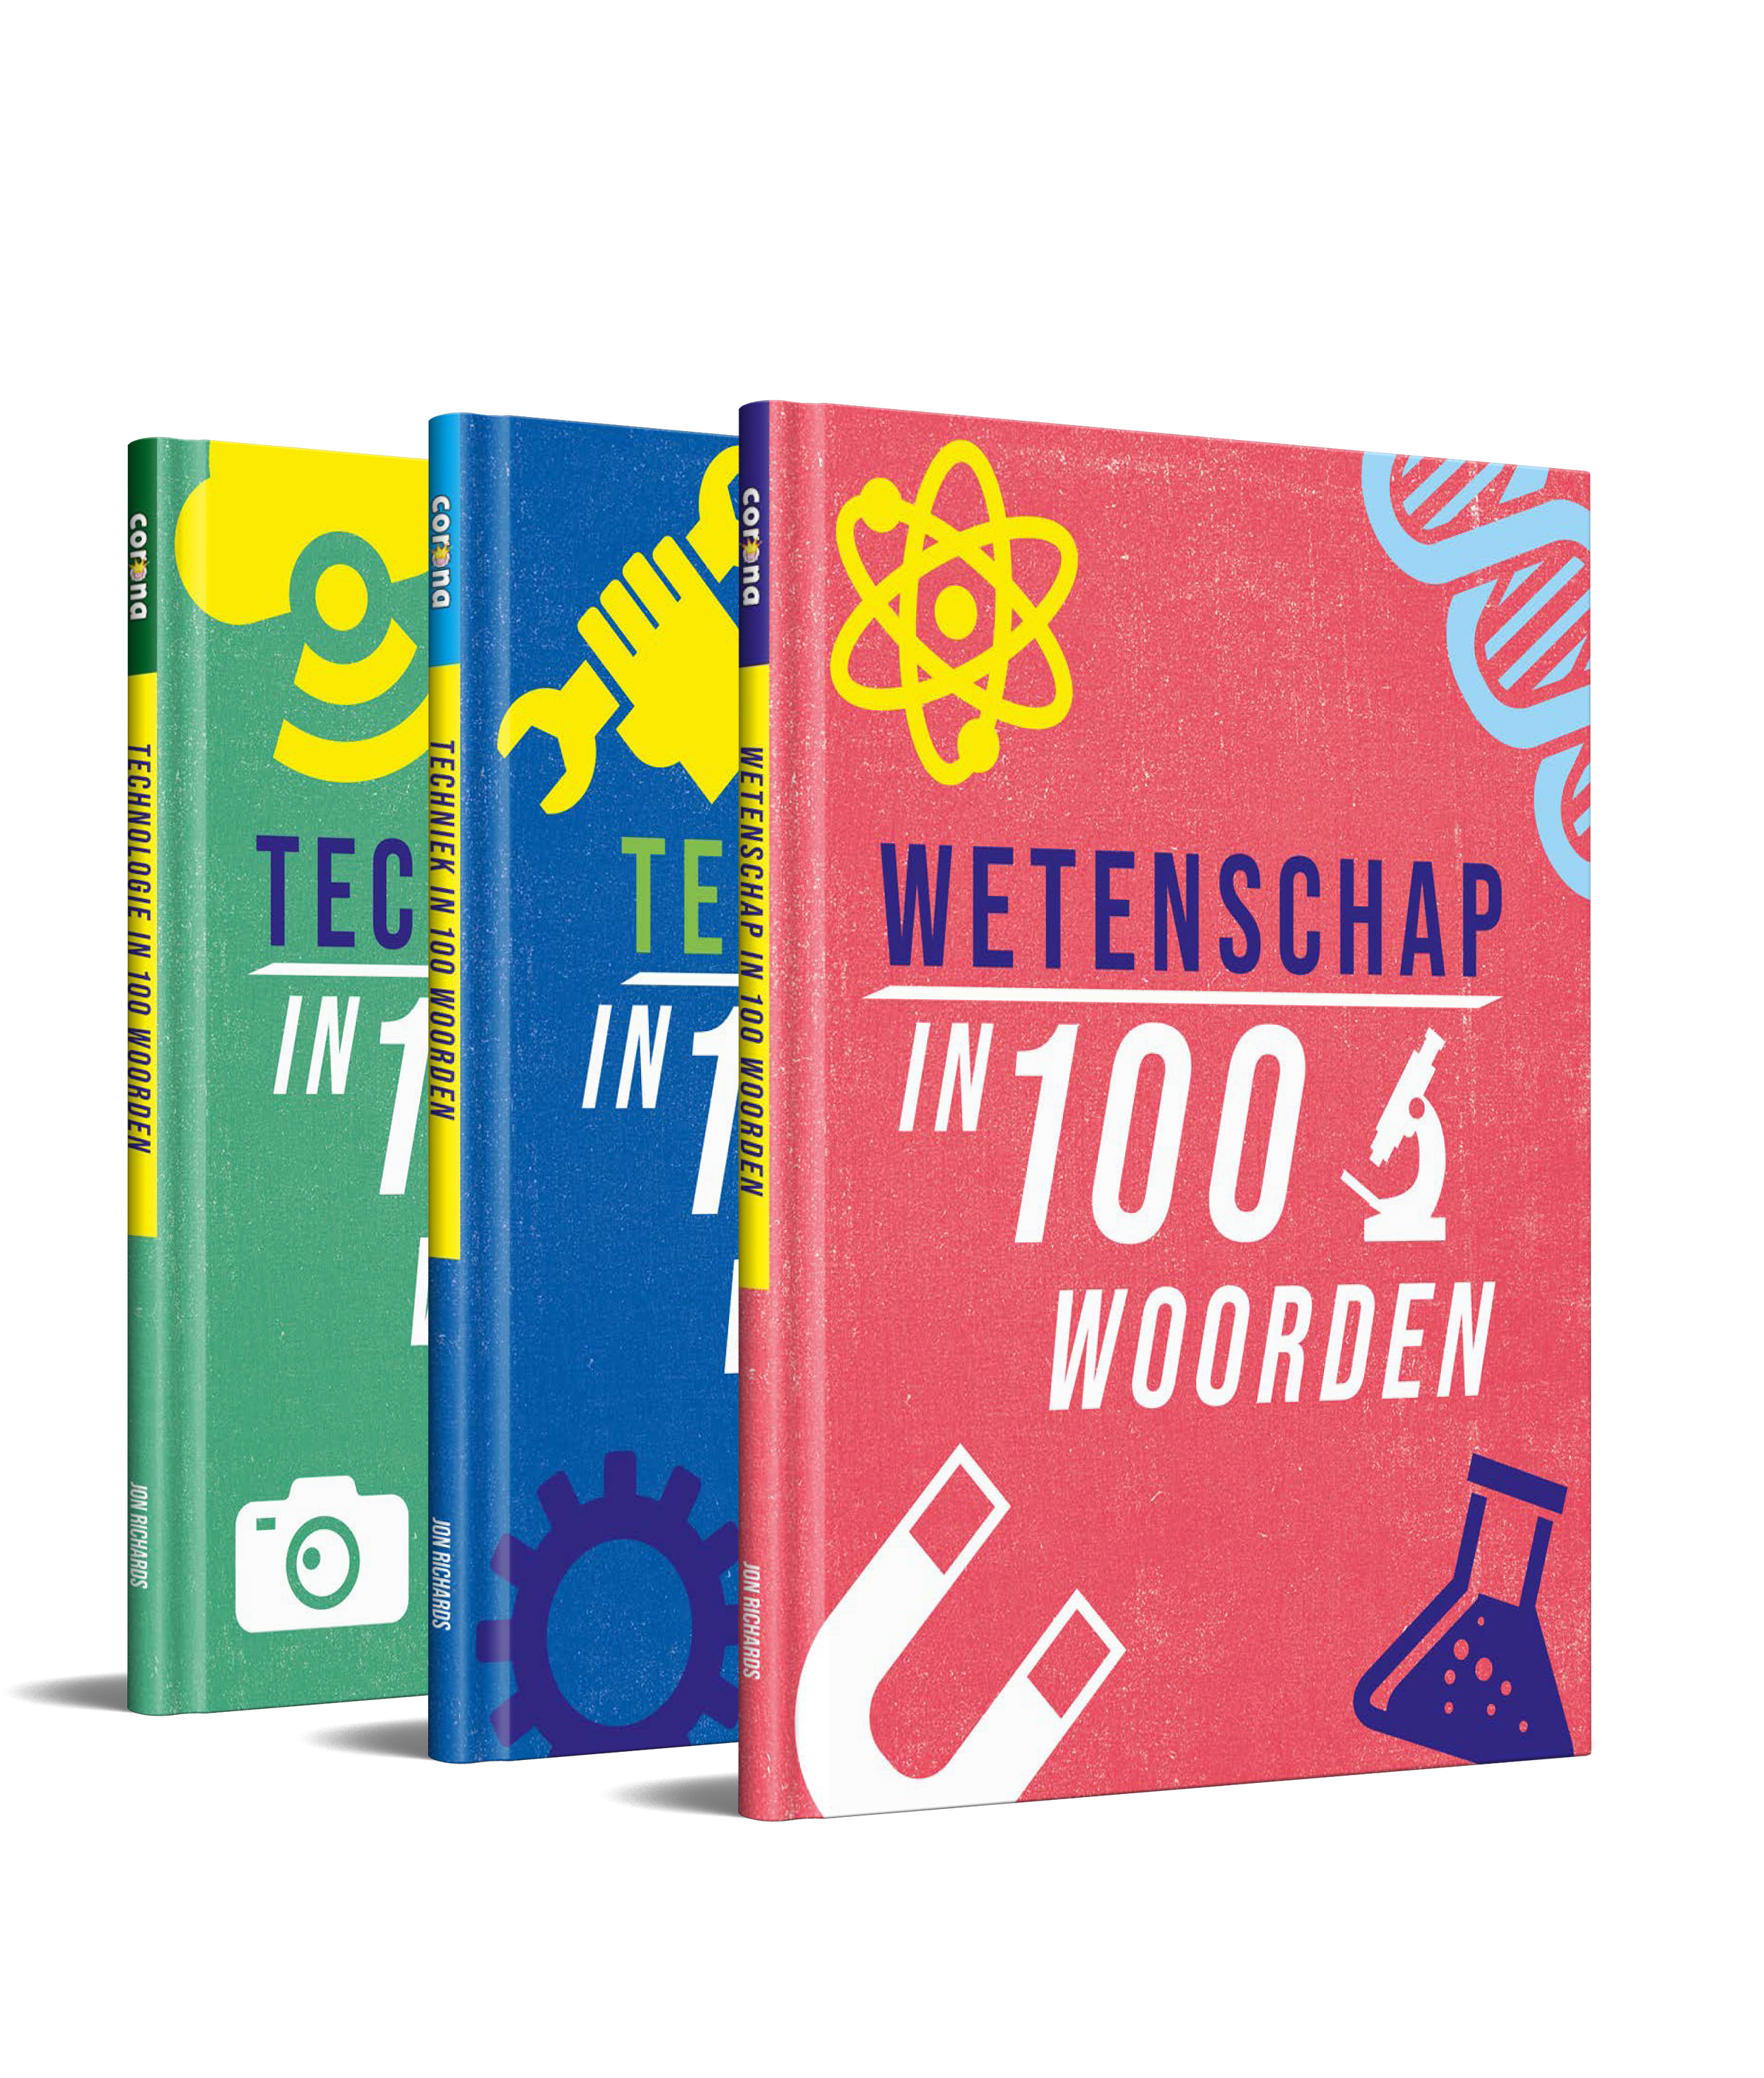 CNSIHW0A1 In 100 woorden